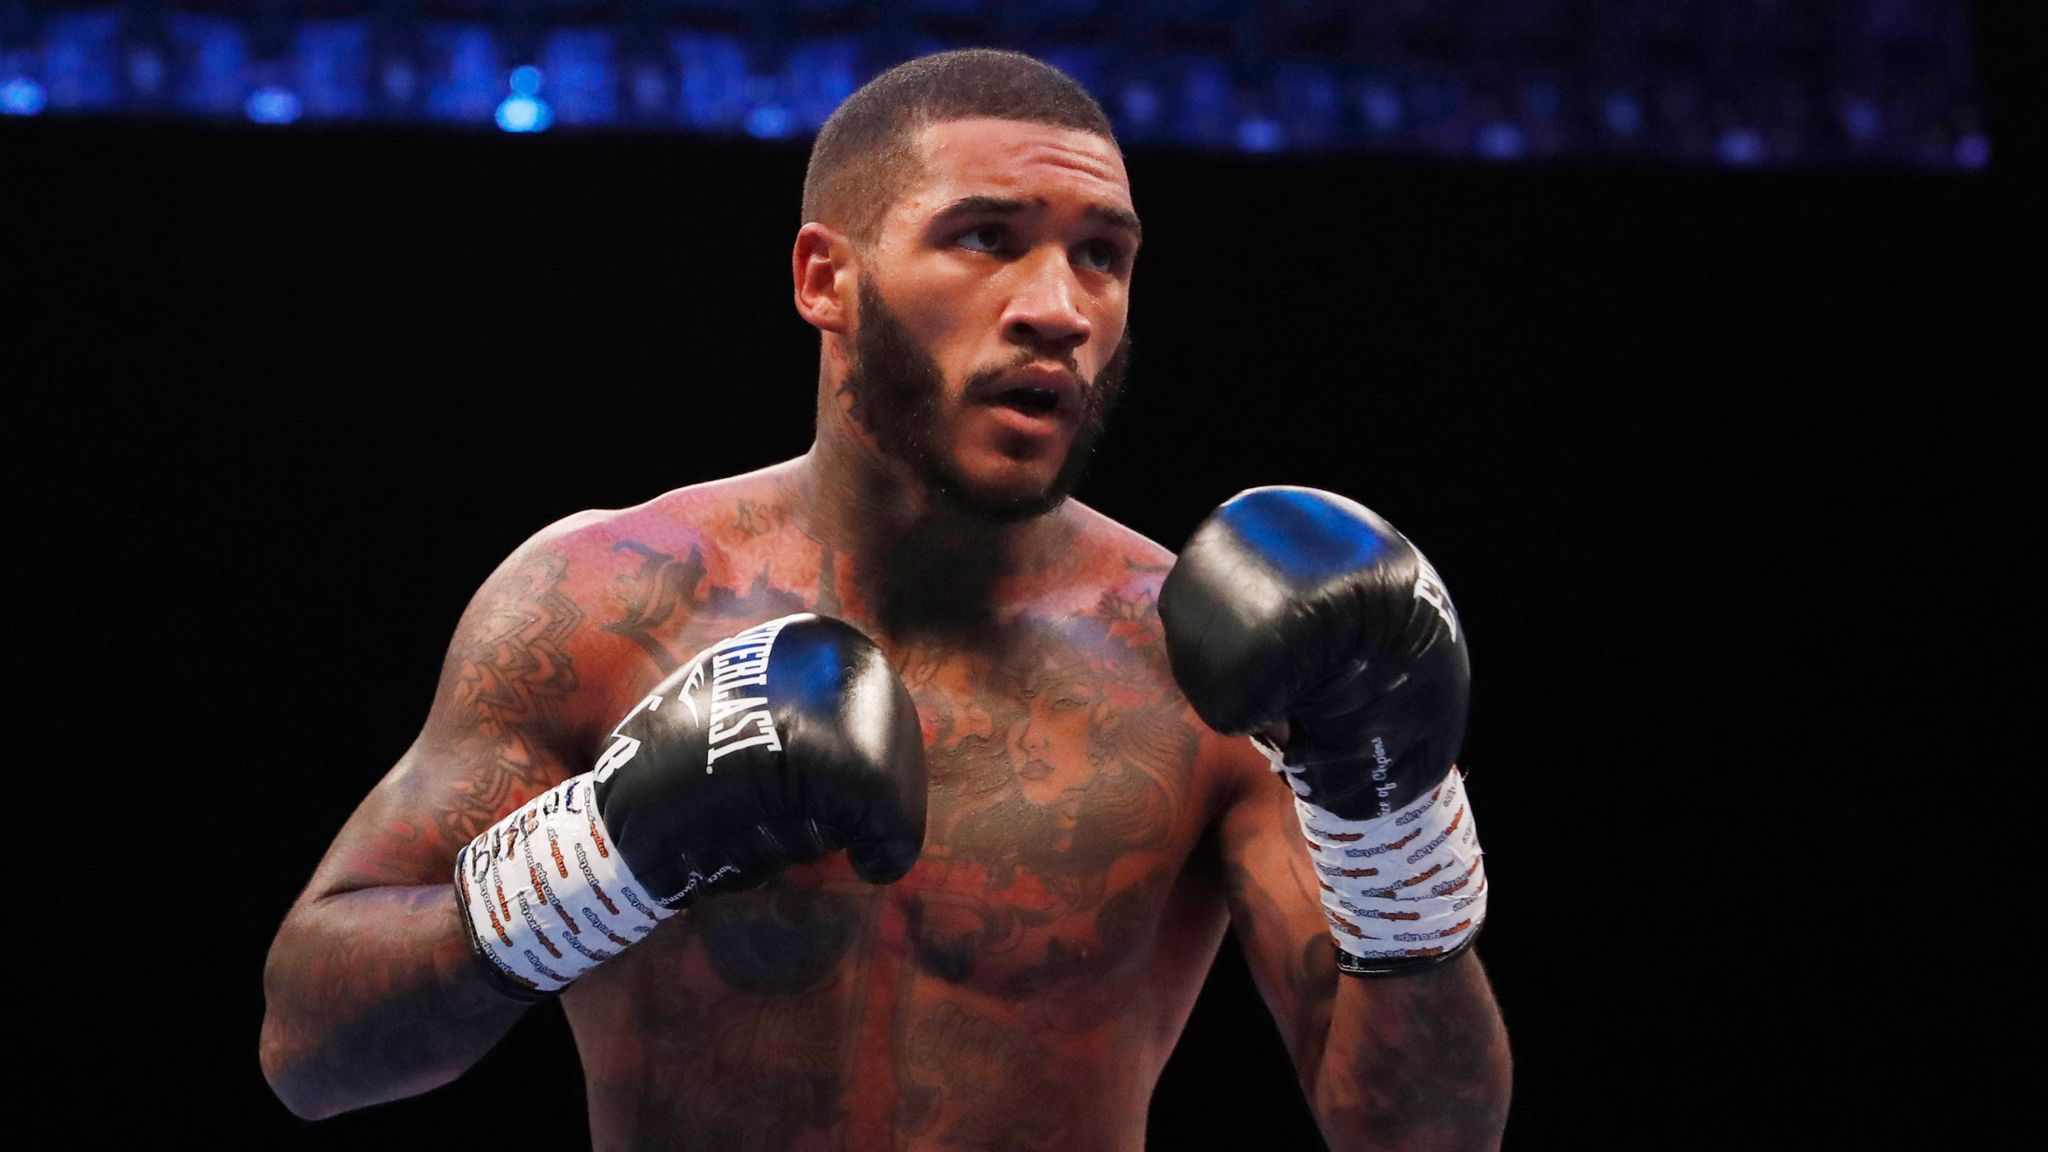 Conor Benn cleared over failed drugs test by World Boxing Council due to 'highly elevated consumption of eggs' | UK News | Sky News